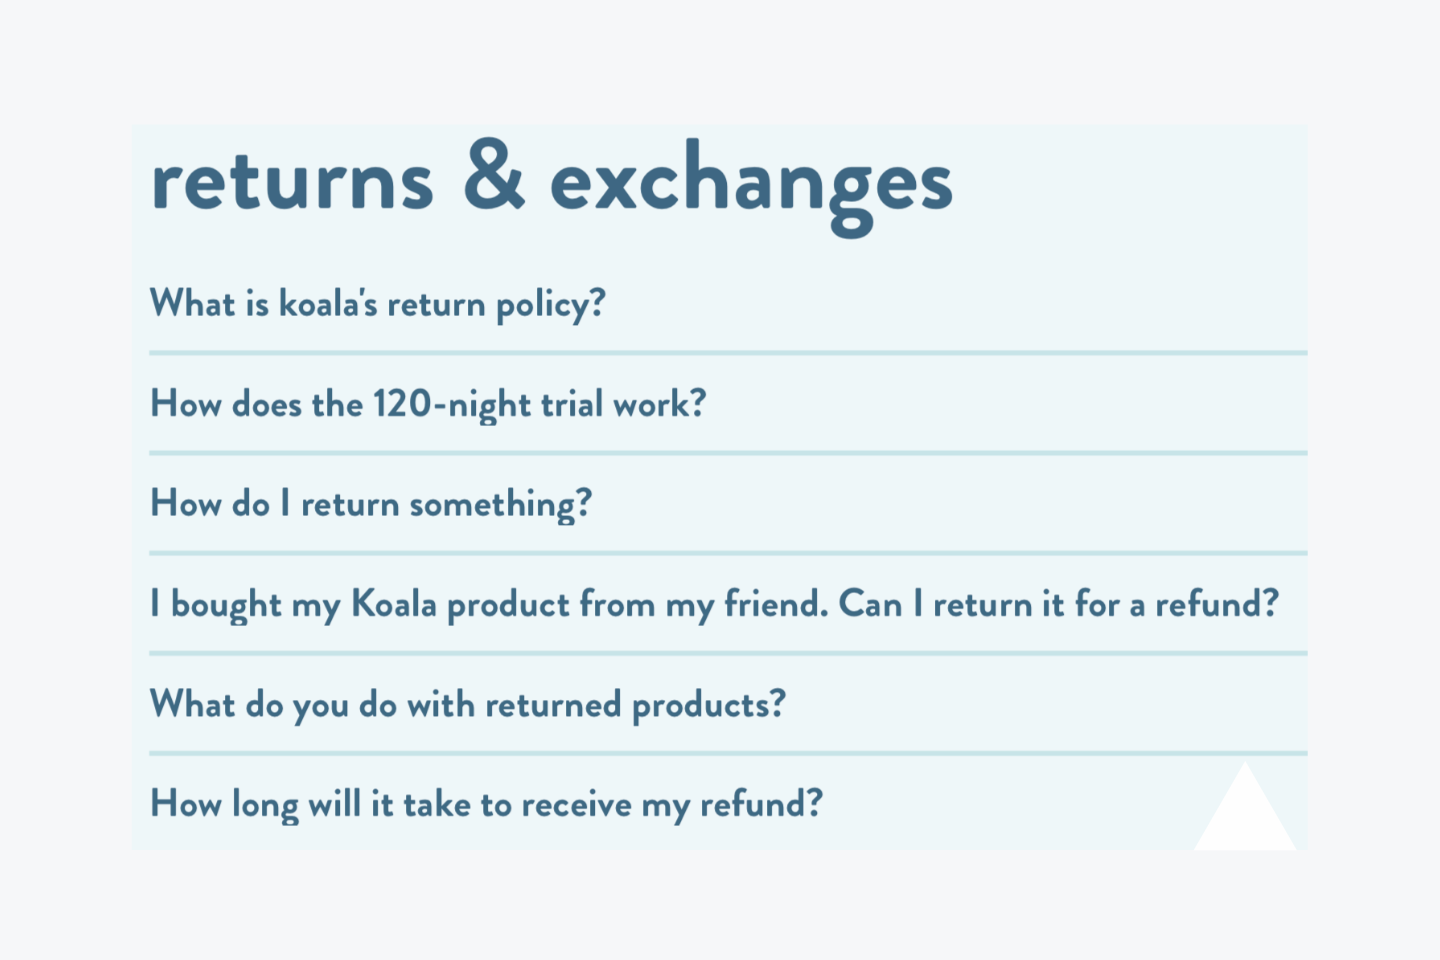 5 Ways To Build a Return Policy Your Customers Will Enjoy – Arka